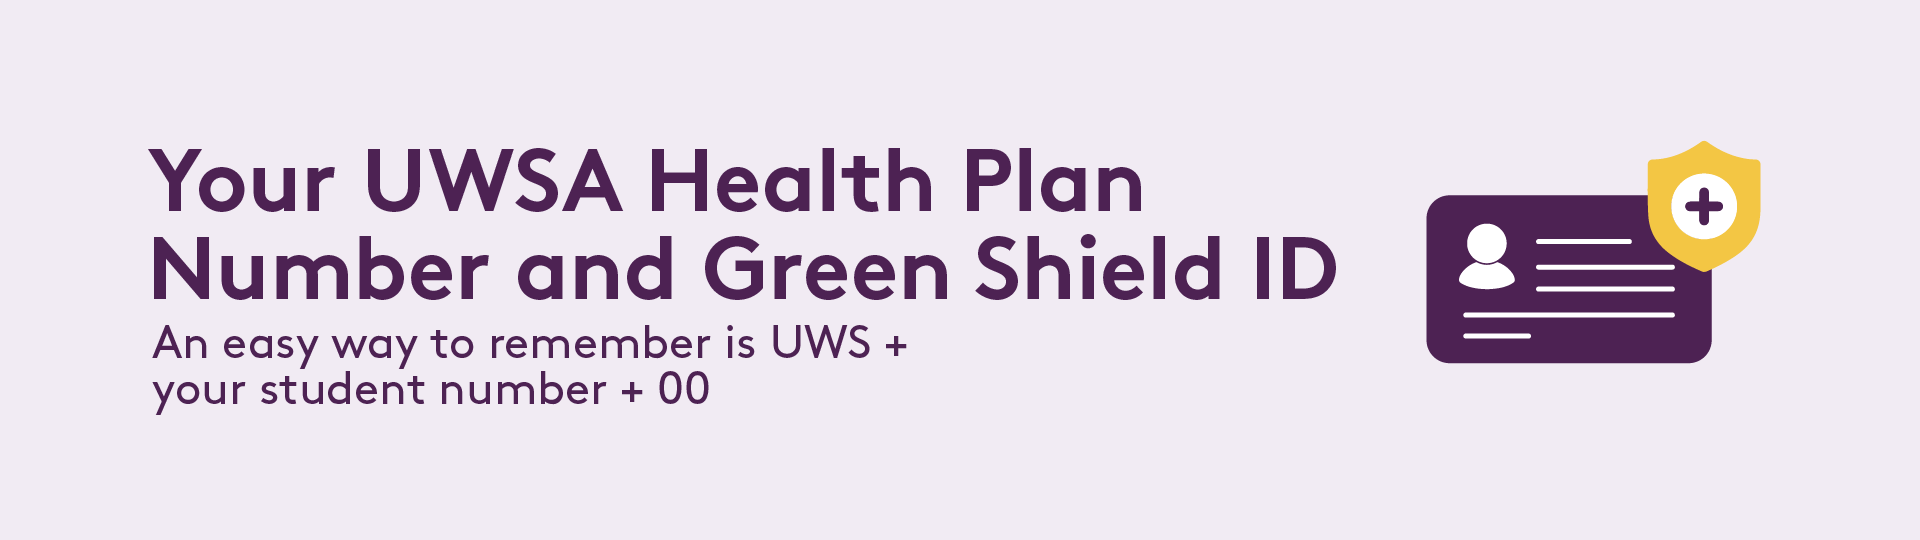 Your UWSA Health Plan Number and Green Shield ID